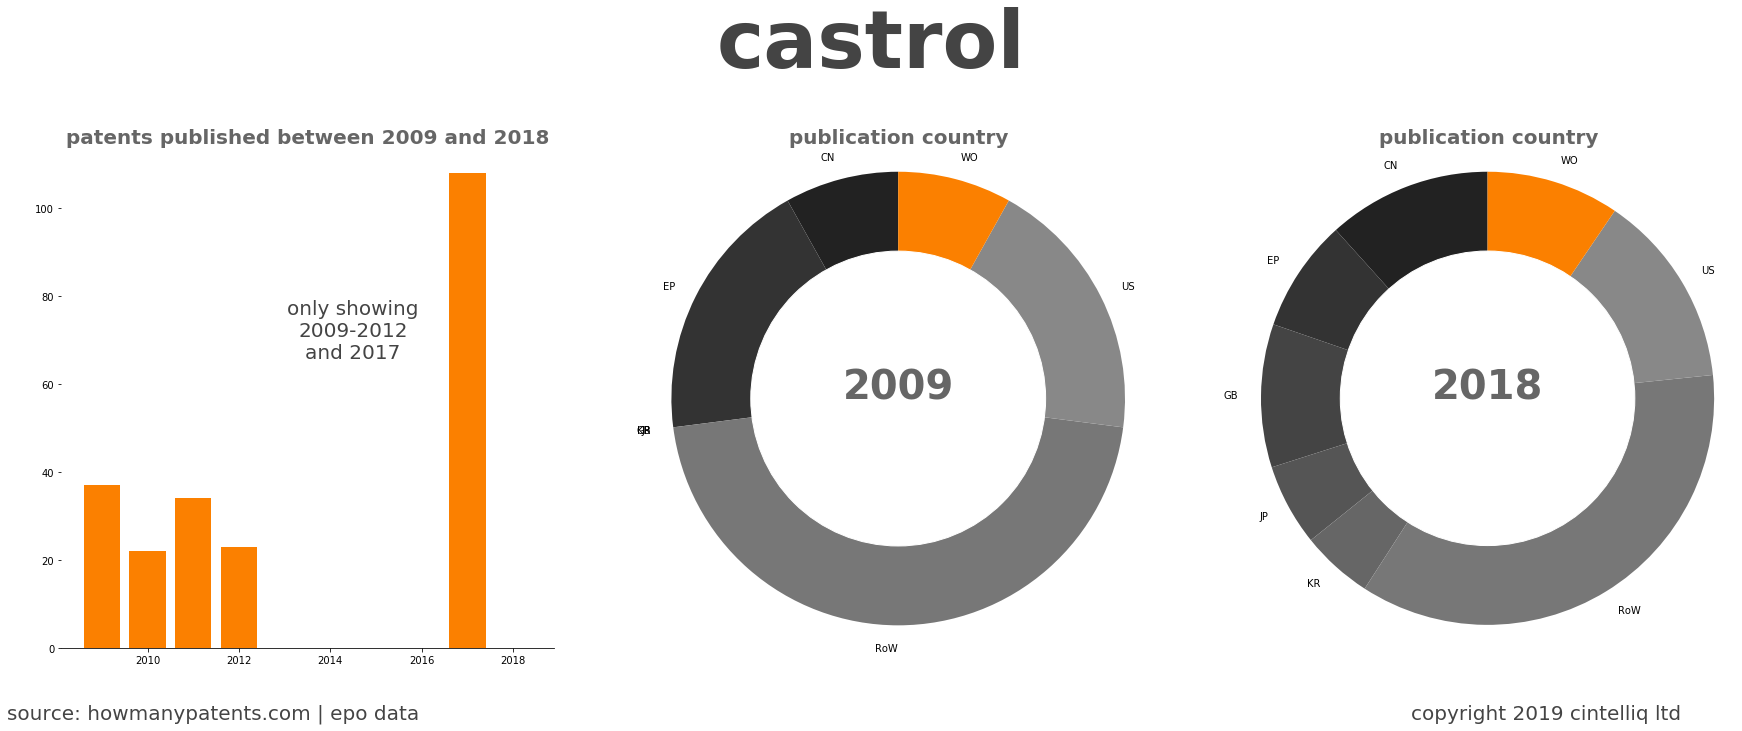 summary of patents for Castrol